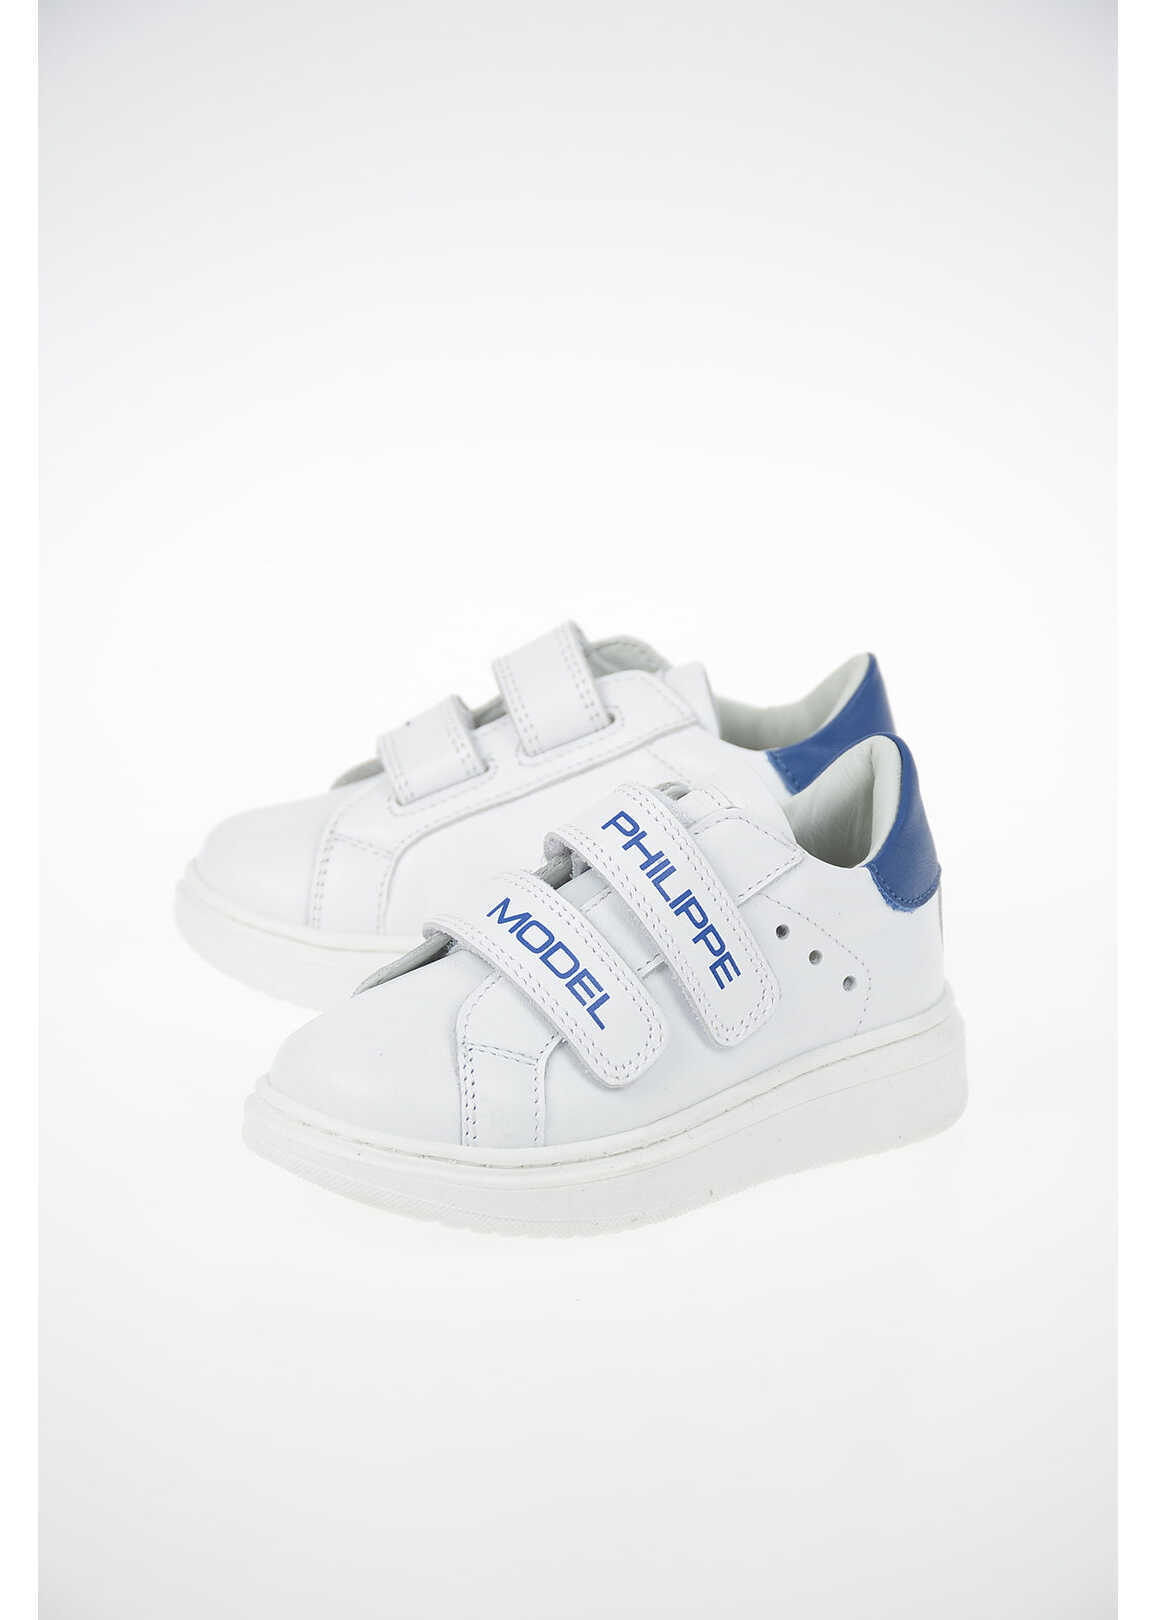 Philippe Model Leather Granville Sneakers White